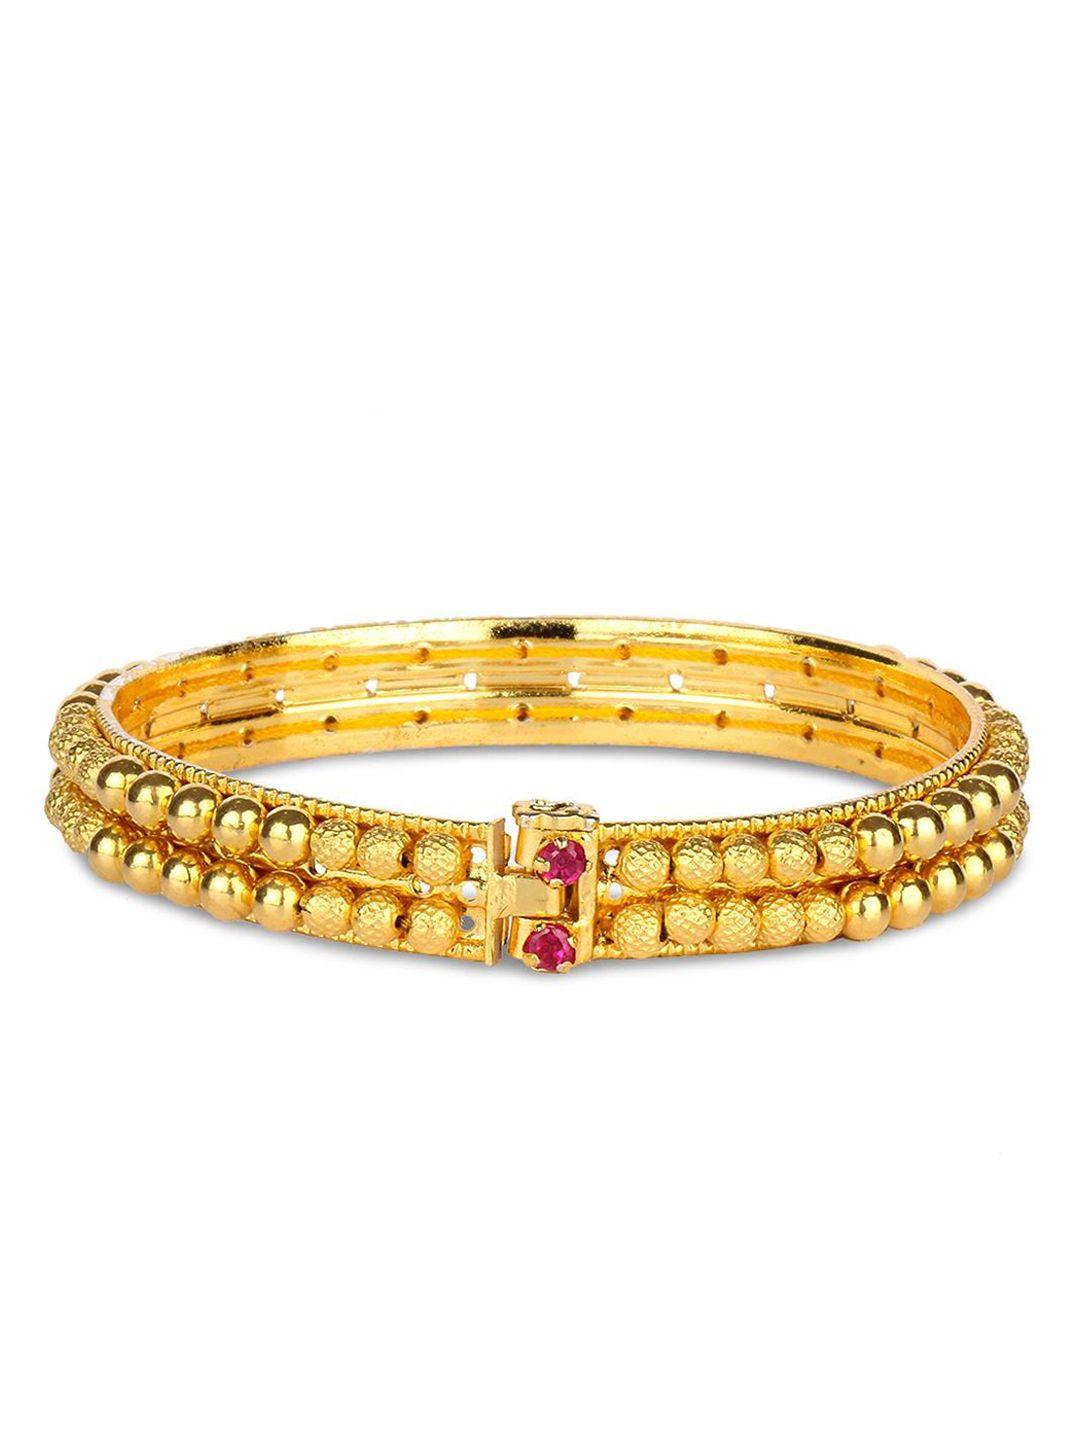 candere a kalyan jewellers company 22kt (916) gold traditional tushi bangle - 2.07gm